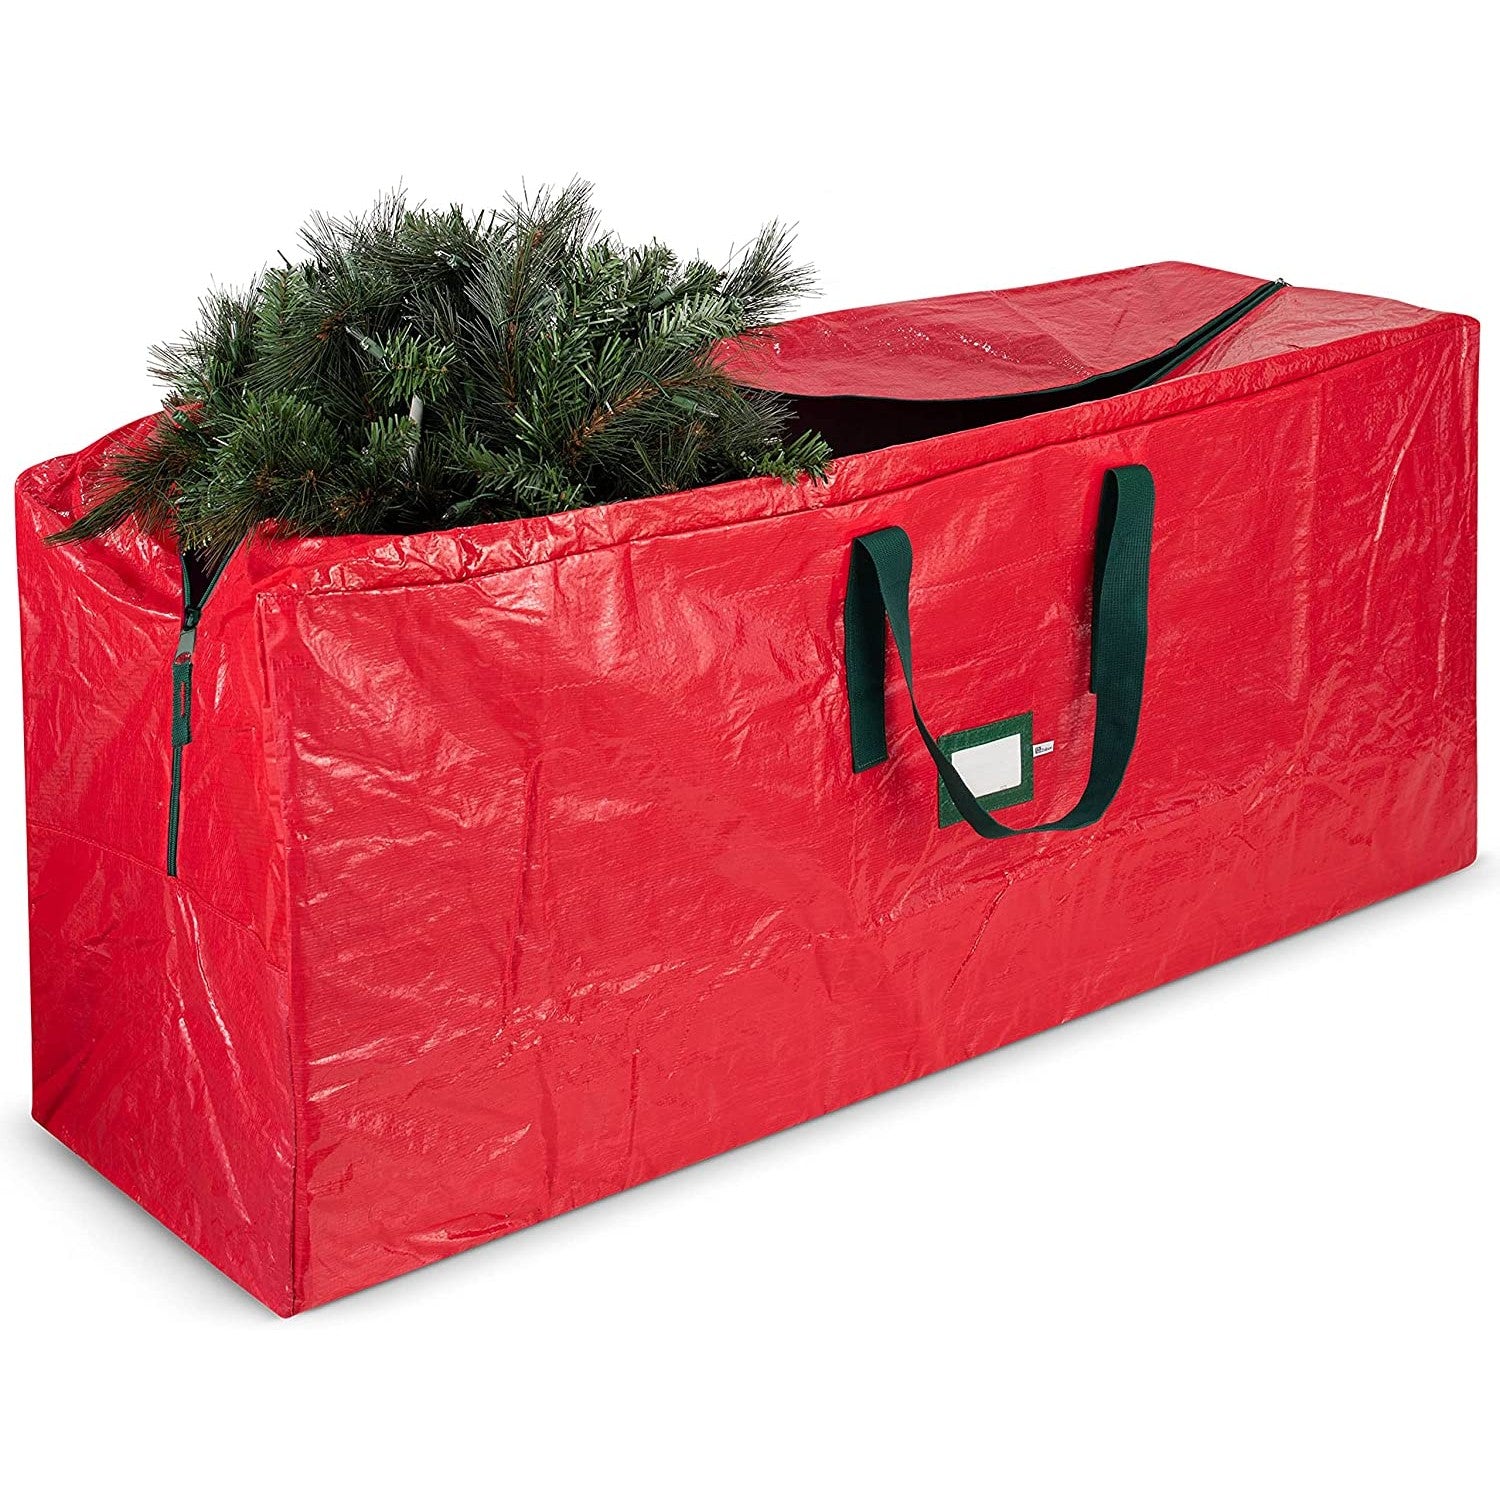 A large red Christmas tree storage bag with a green Christmas tree in the bag.